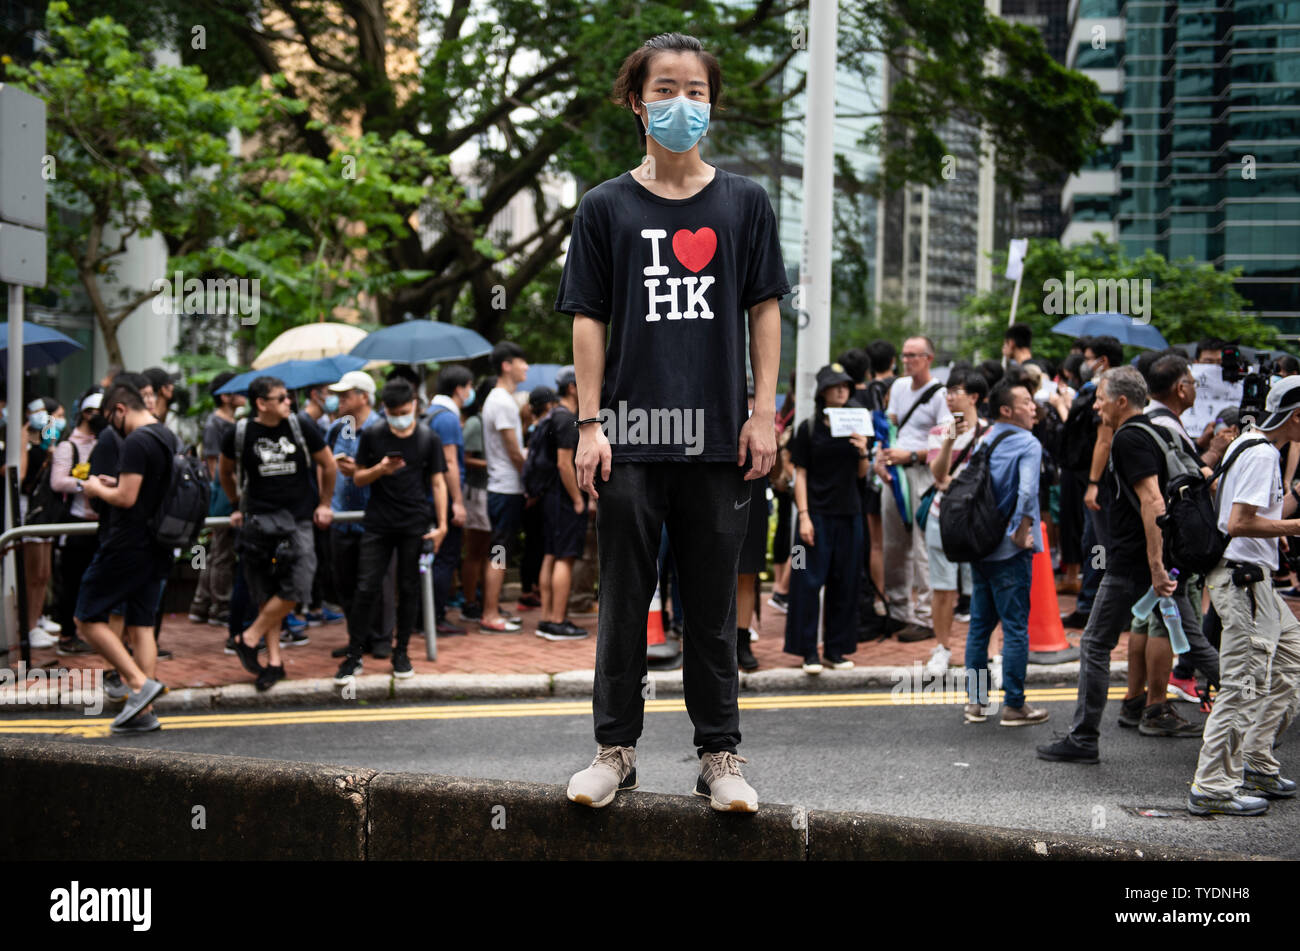 Protester gather outside the British Consulate General during the demonstration.Activists protest against the extradition bill rallied to different nation’s embassies and consulates to raise the issue with Chinese President Xi Jinping at this week's G-20 summit in Japan. Stock Photo